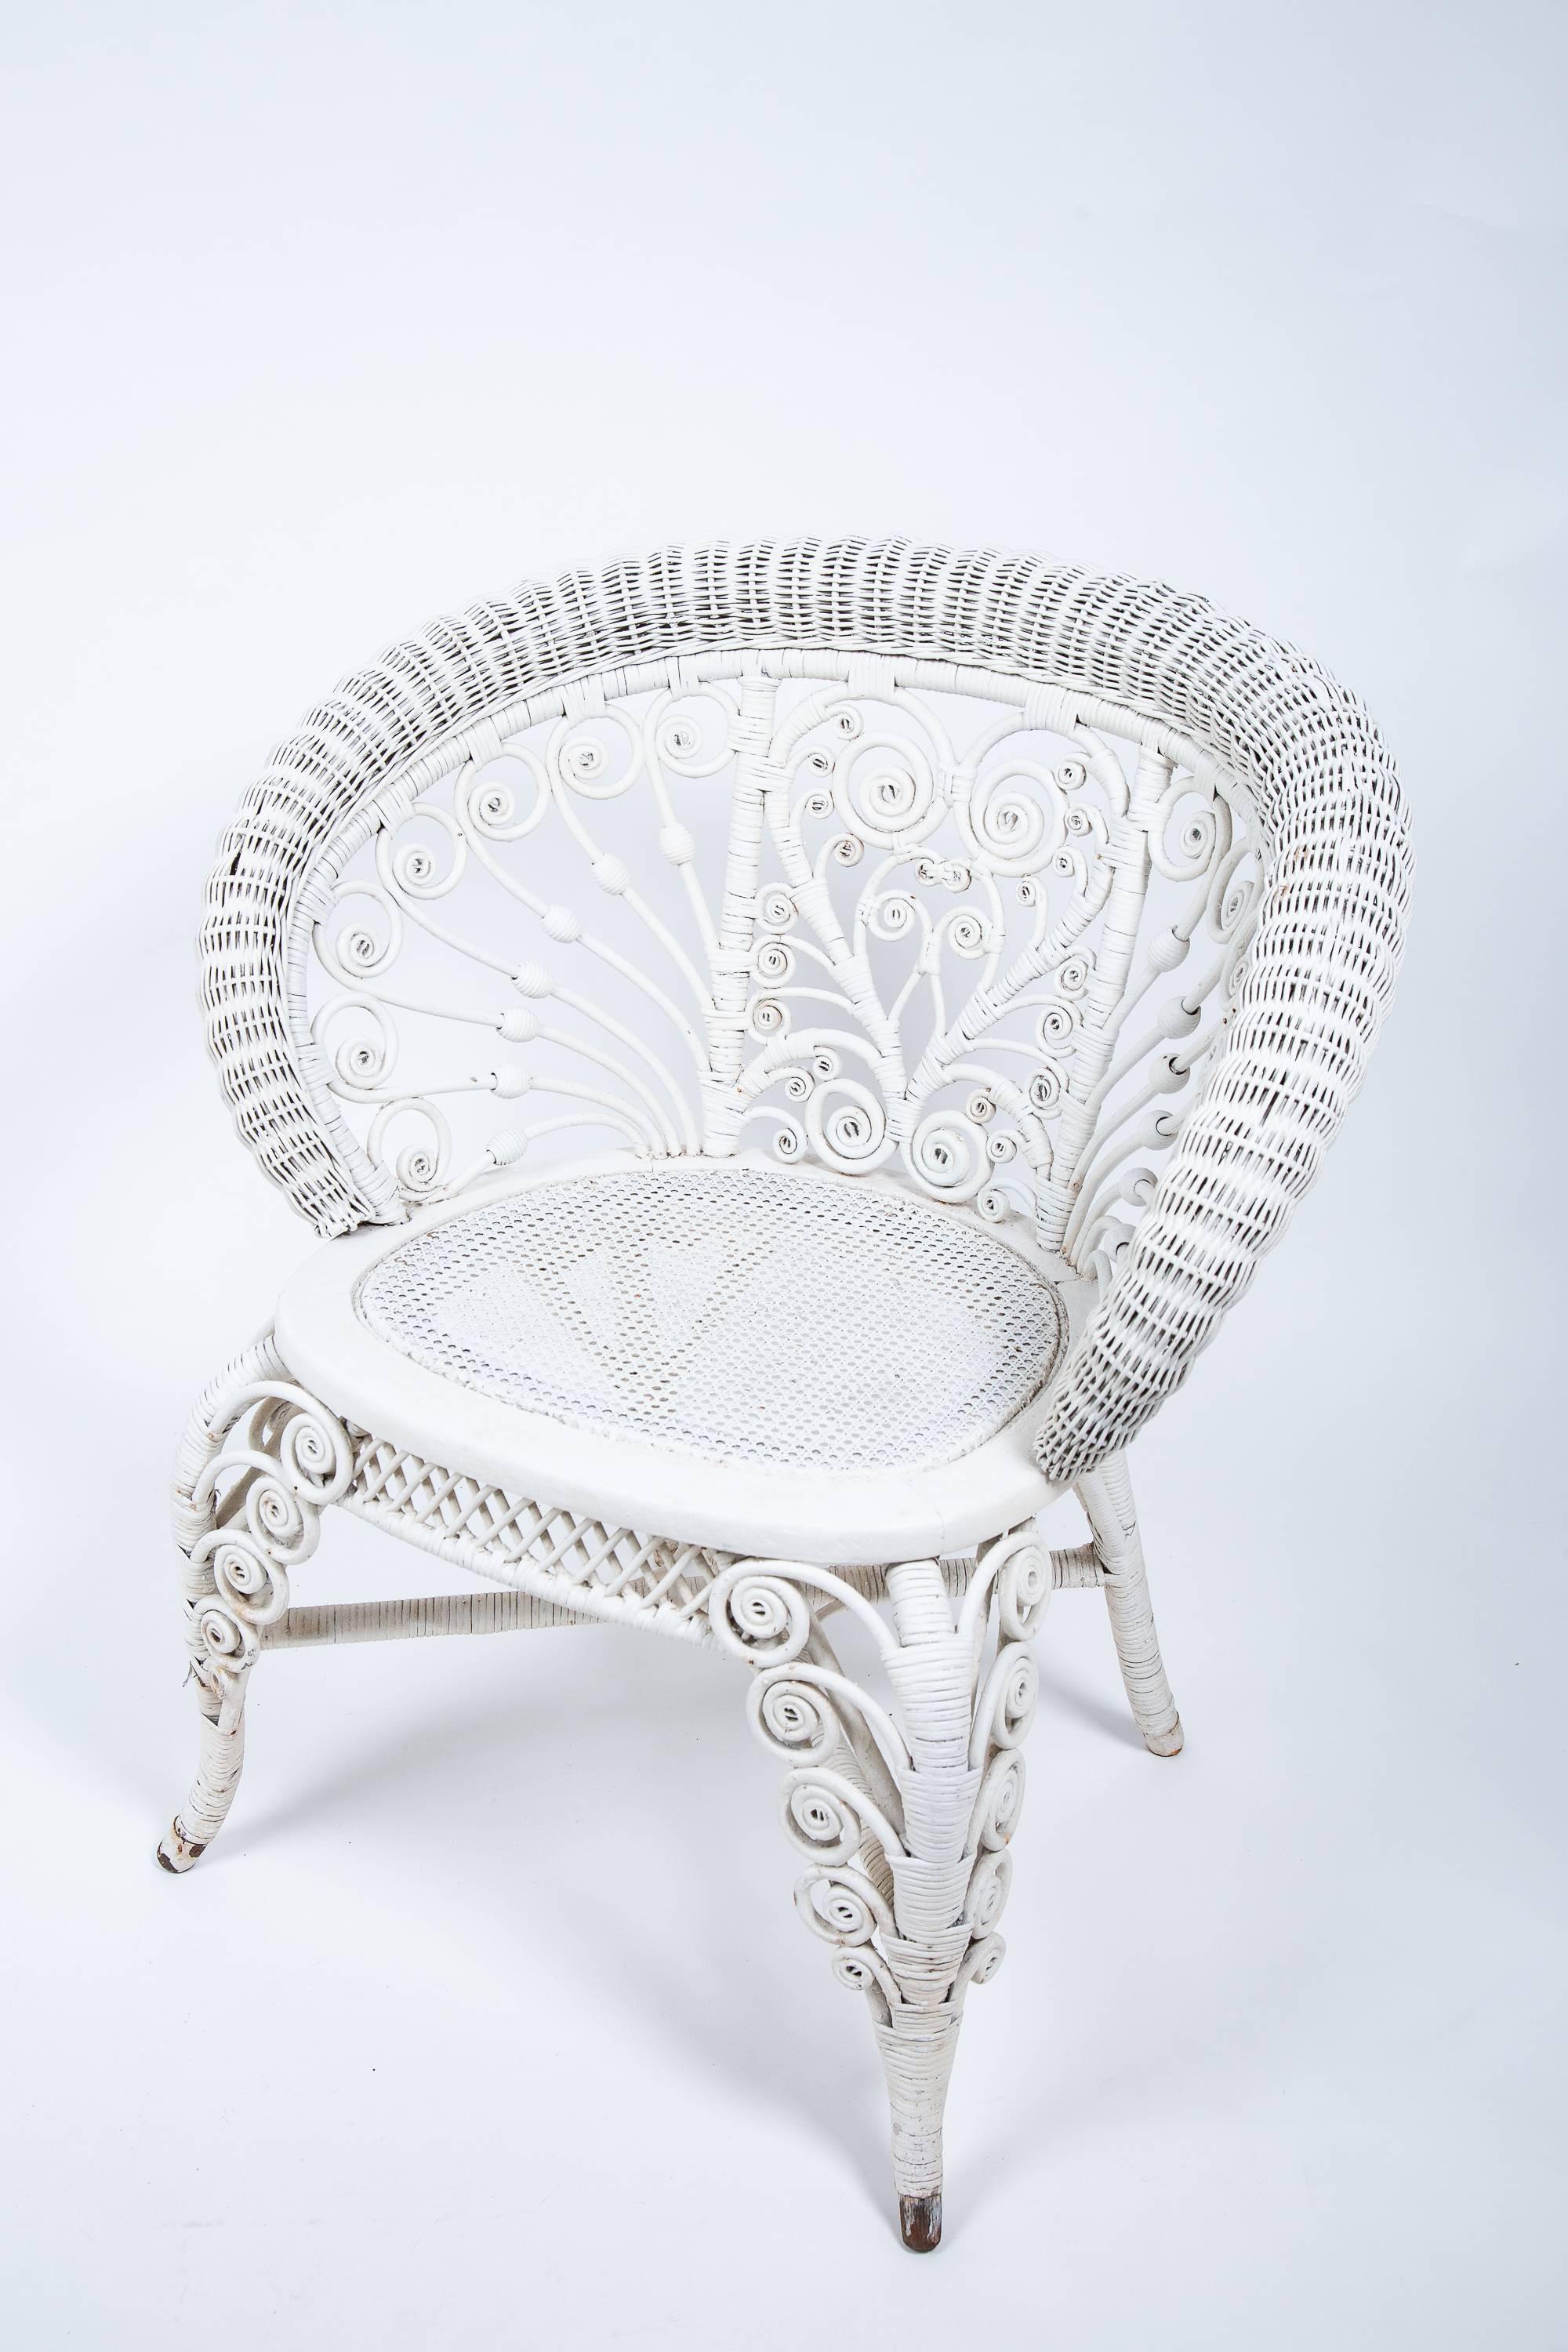 Pair of Victorian white painted wicker parlour chairs. Hand crafted intricate heart design back, and curved wicker leaves climb the front legs. 
Wonderful parlour, sunroom, or patio set.